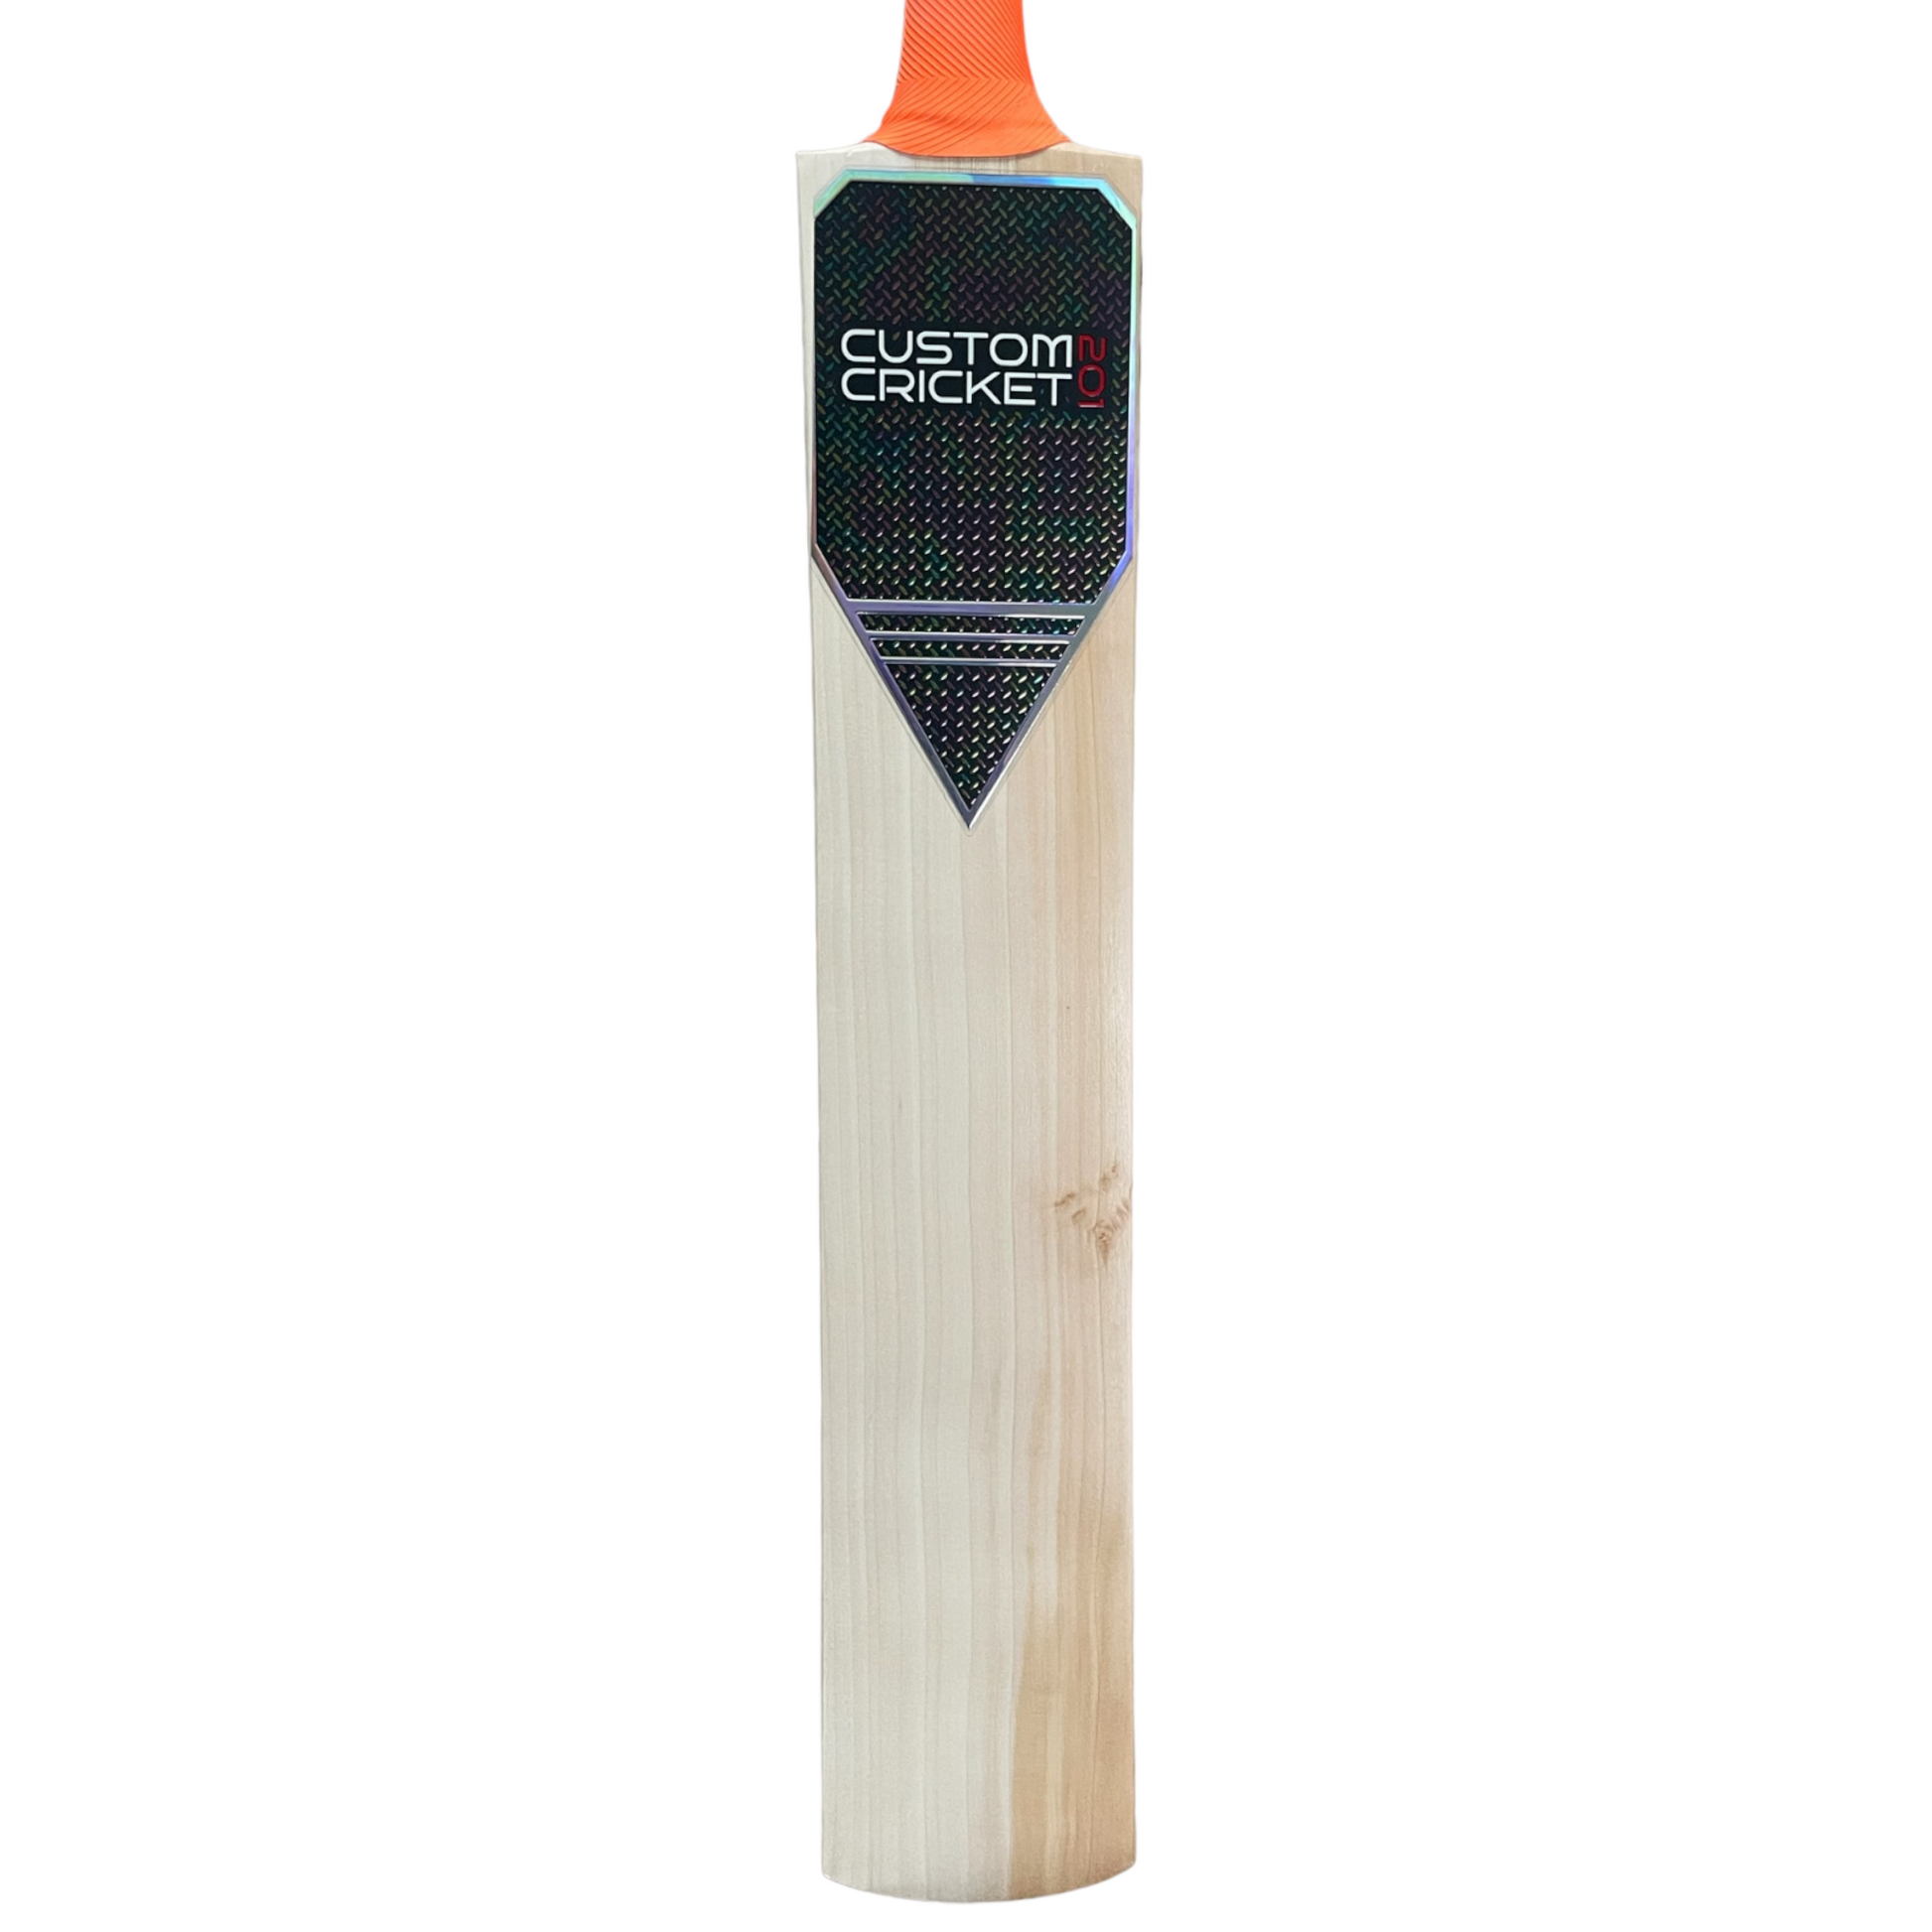 Youth childs kids cricket bat size 6 english willow handmade handcrafted christmas present online store showroom brighton and hove sussex, surrey hampshire kent london essex wales  